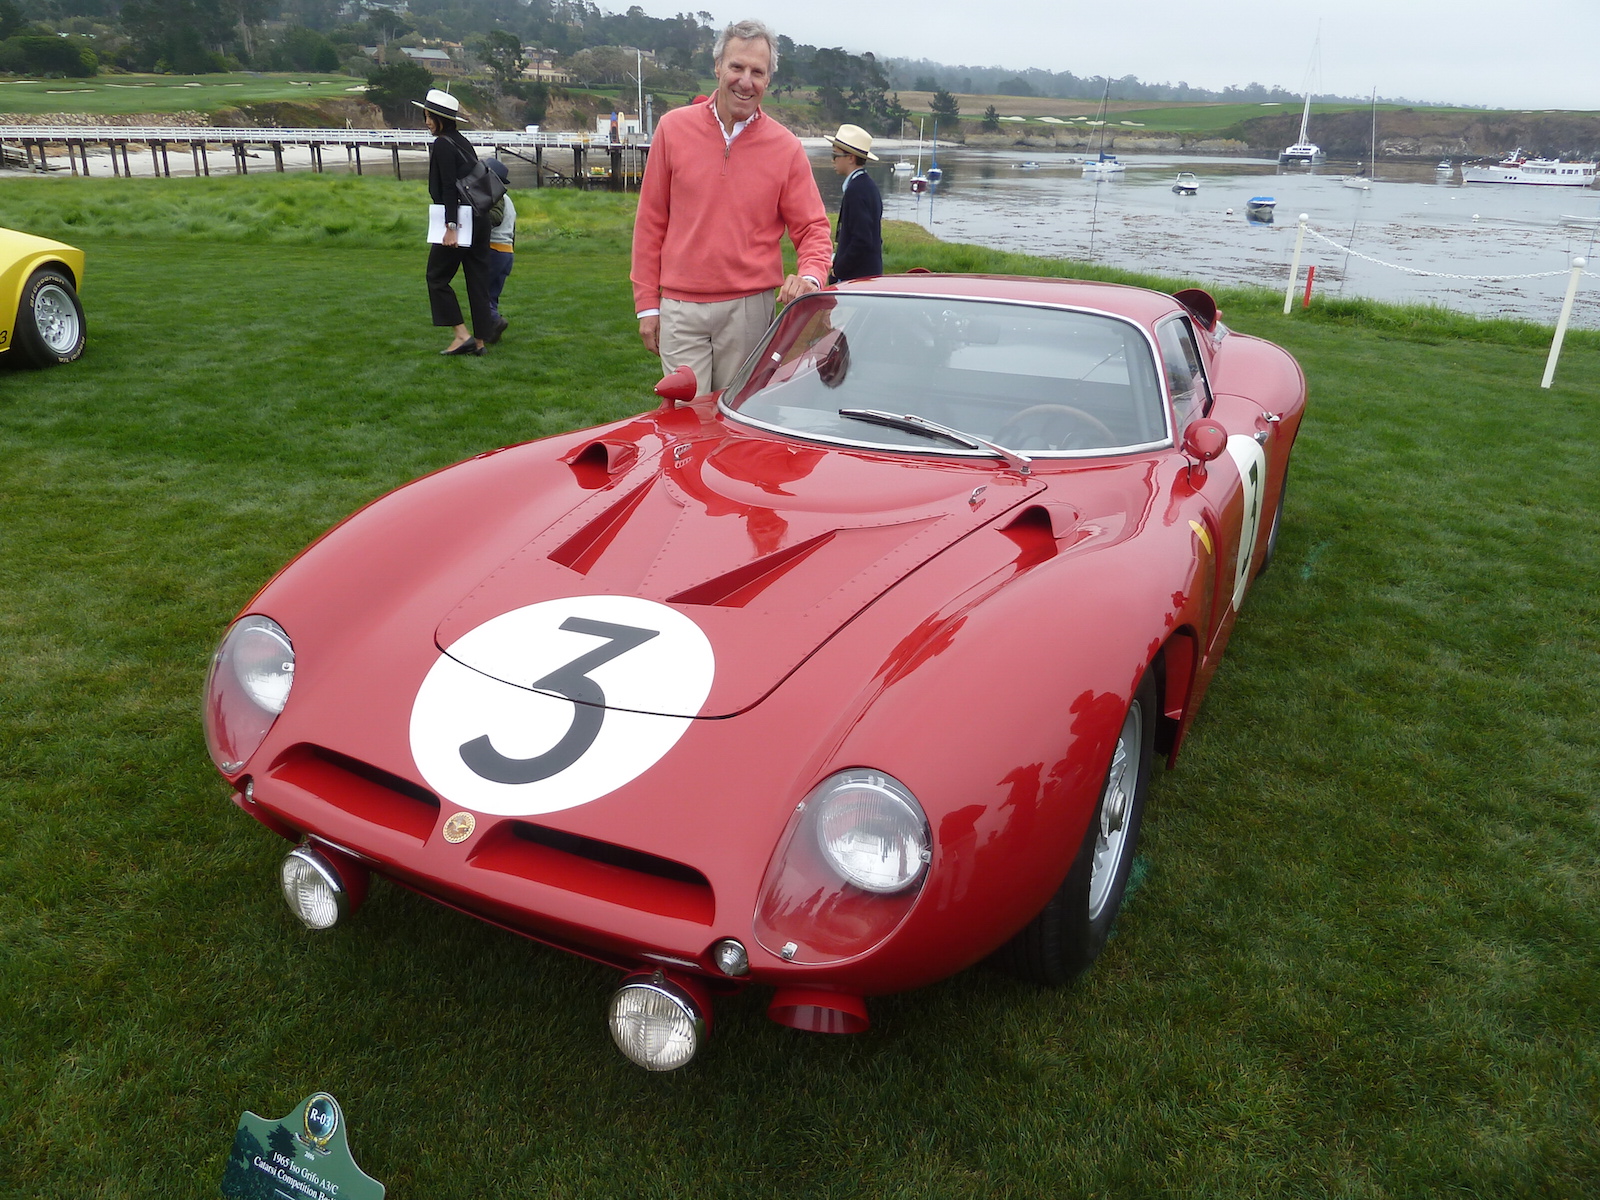 The Le Mans Winning Iso Bizzarrini A3/C - A Video